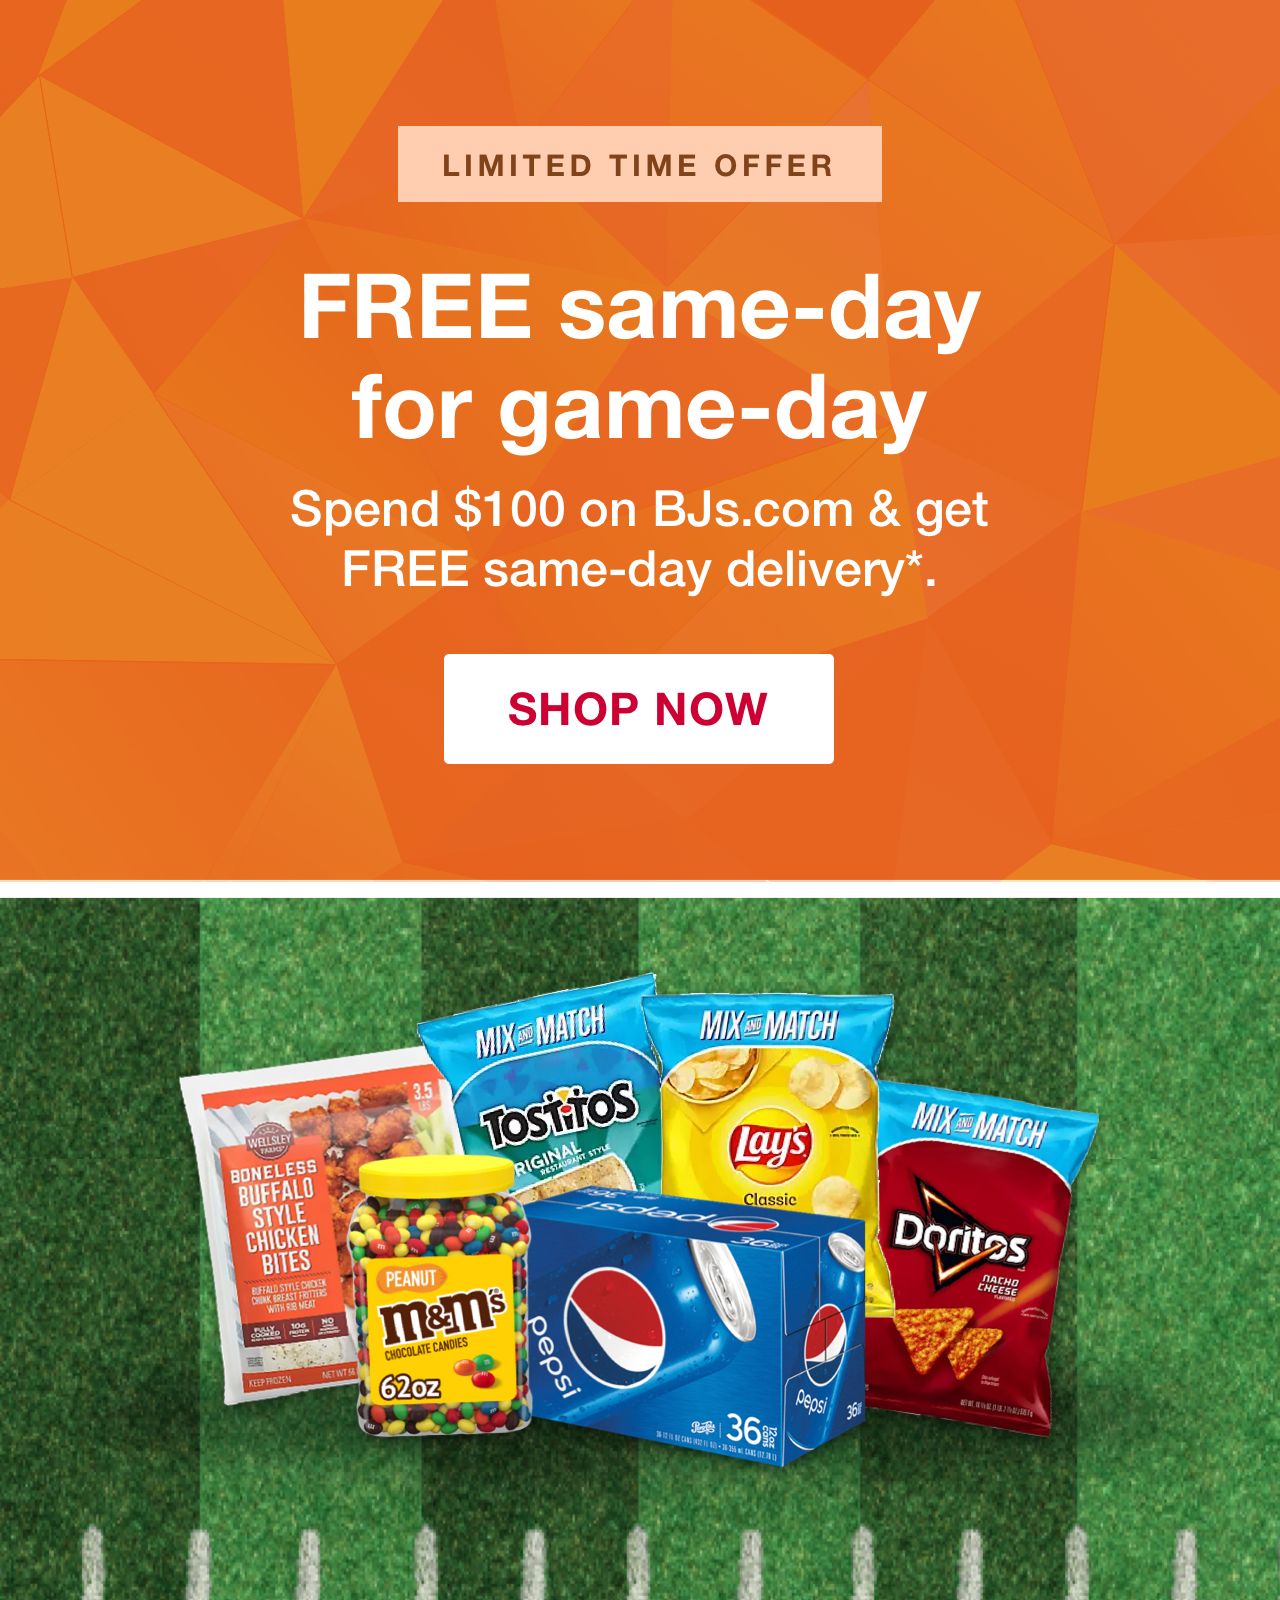 Free same-day for game-day. Spend $100 on BJs.com and get free same-day delivery.* click to shop now